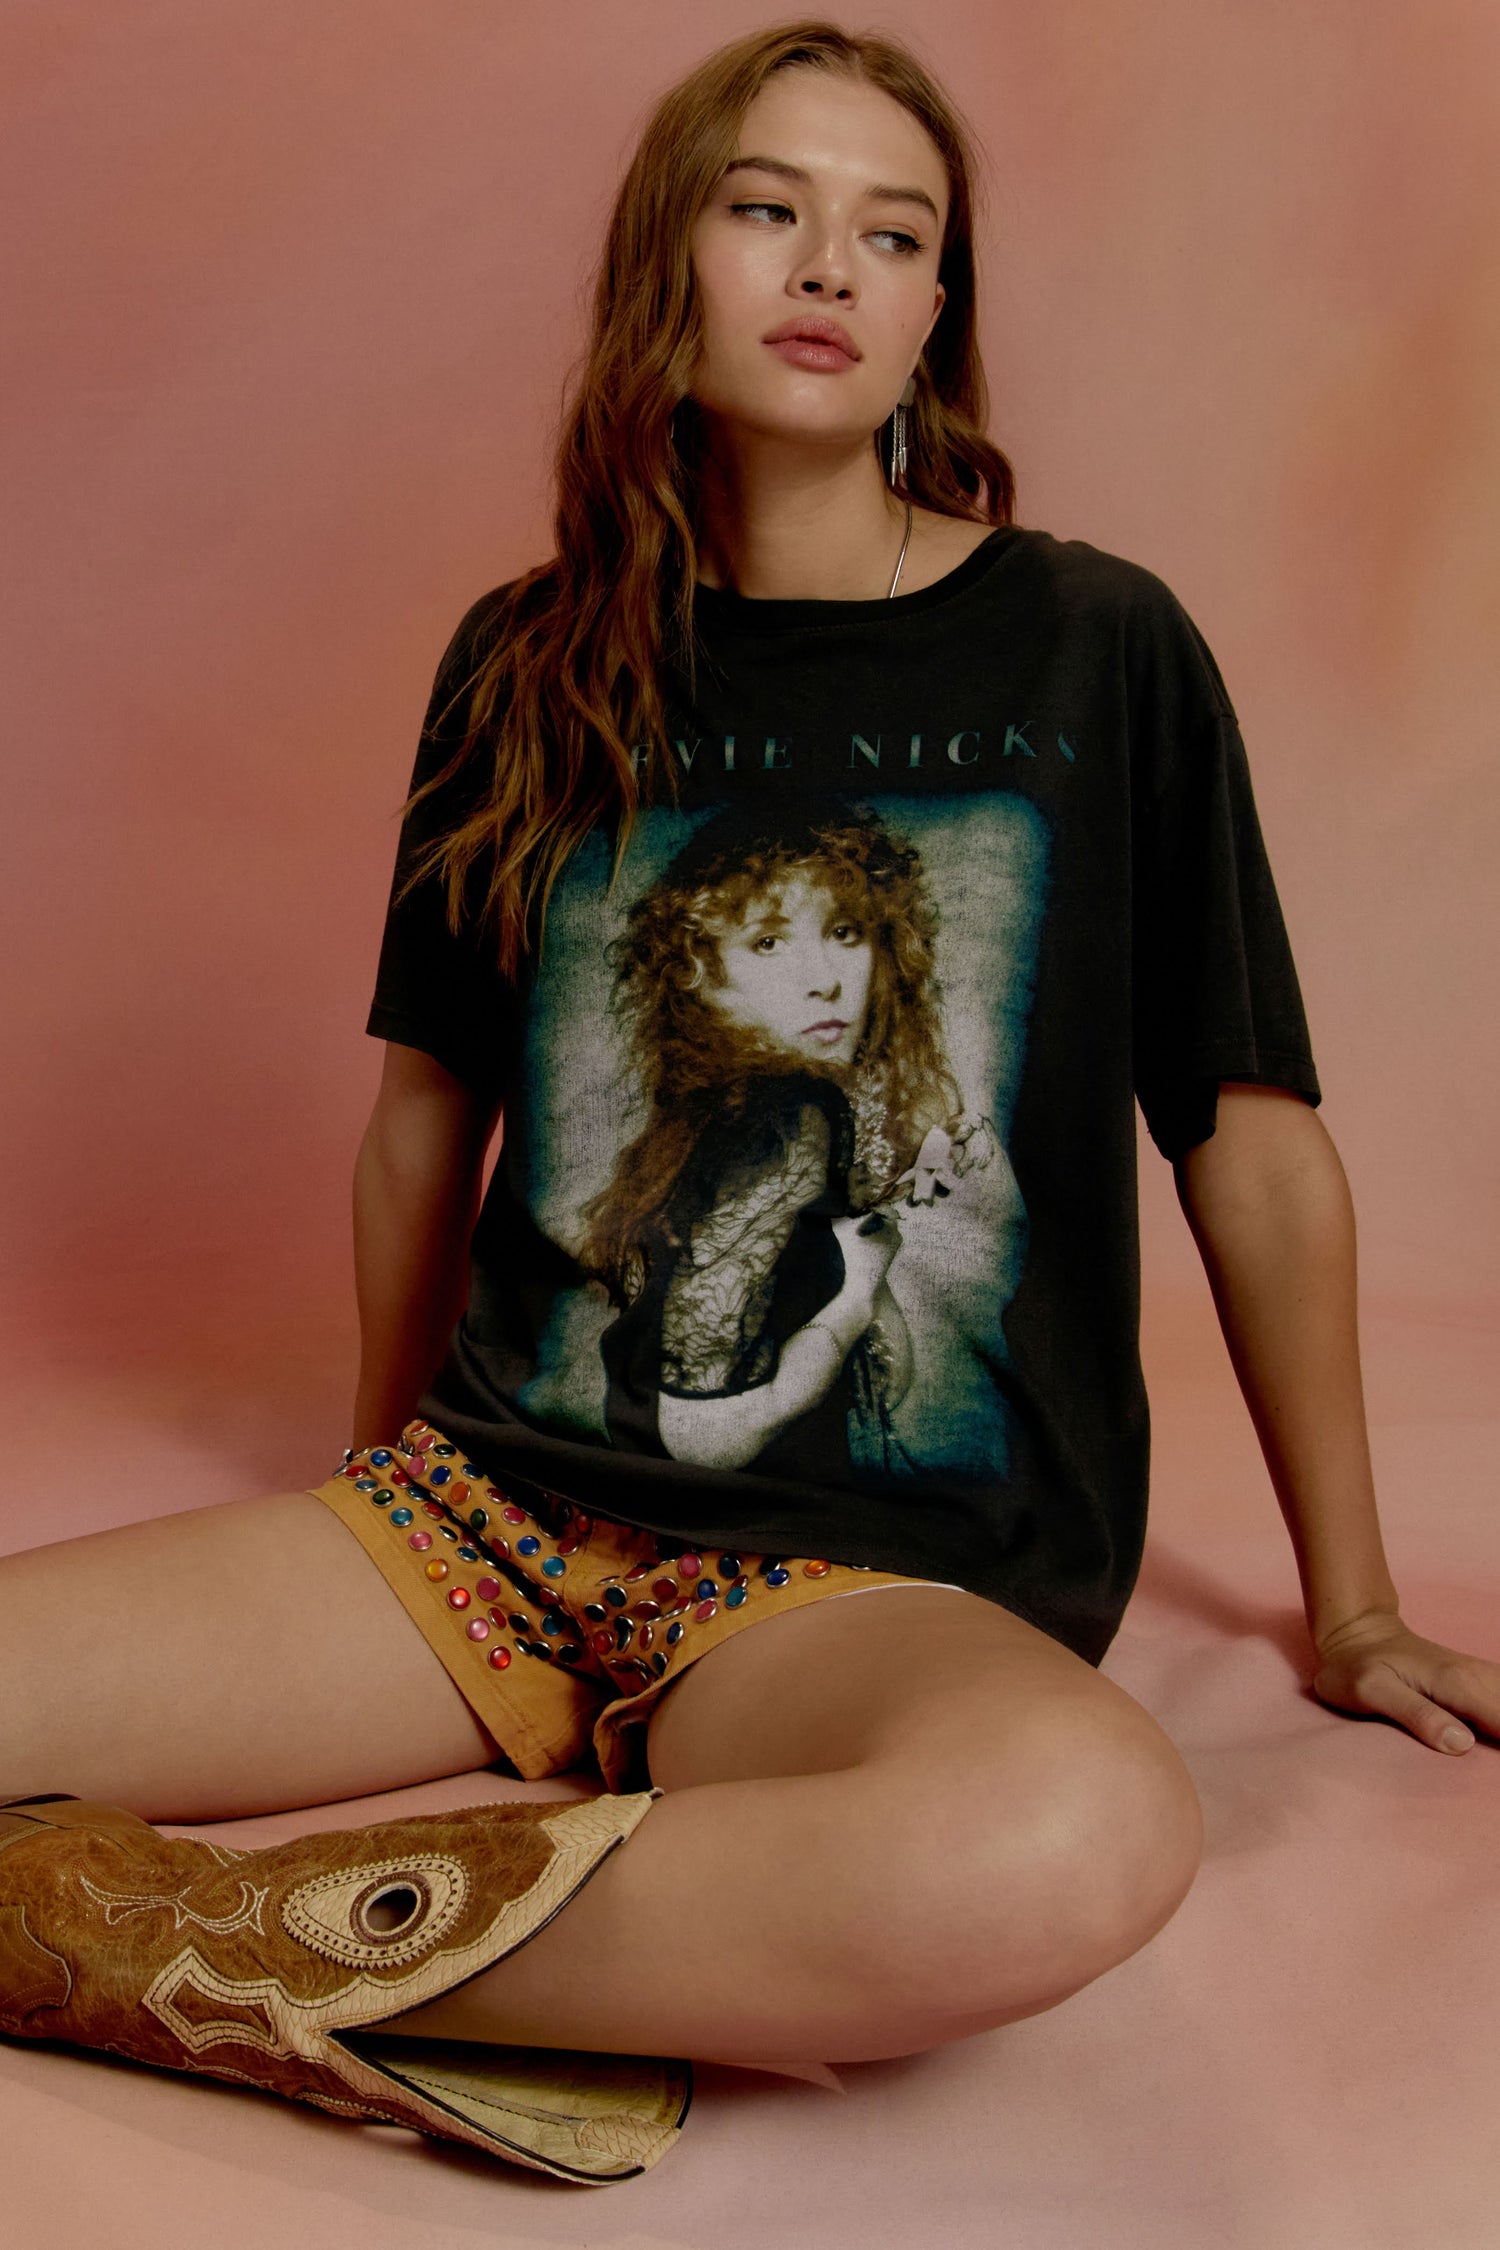 Brown-haired model featuring a back tee designed with a portrait of the leading lady in a mastered distressed technique.